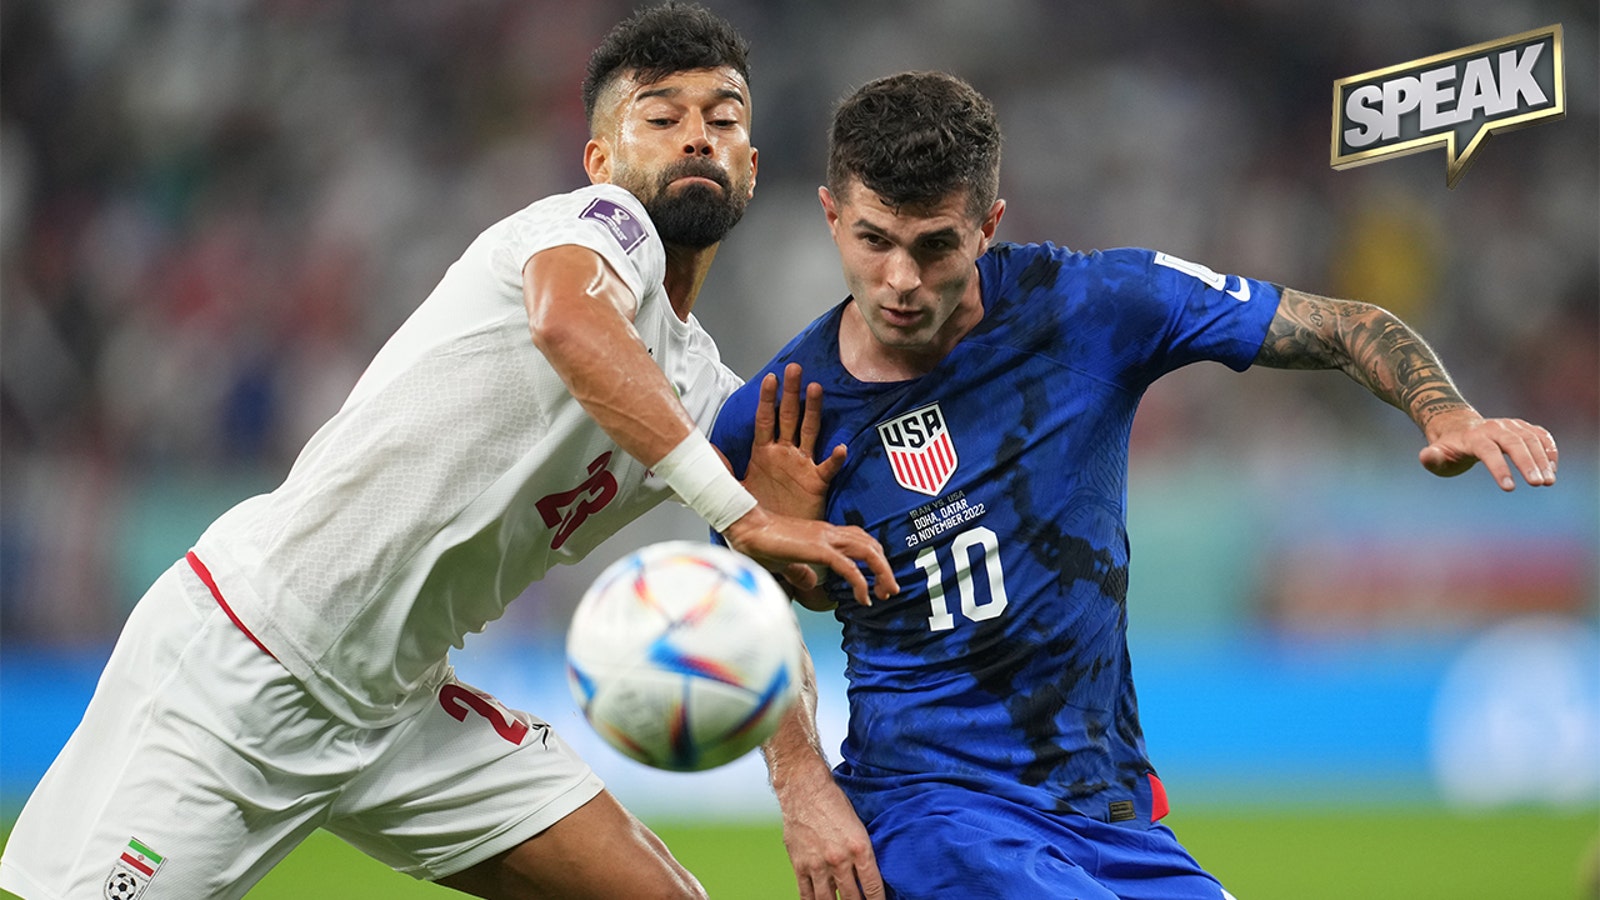 Christian Pulisic leads USMNT to 1-0 win vs. Iran in 2022 FIFA World Cup